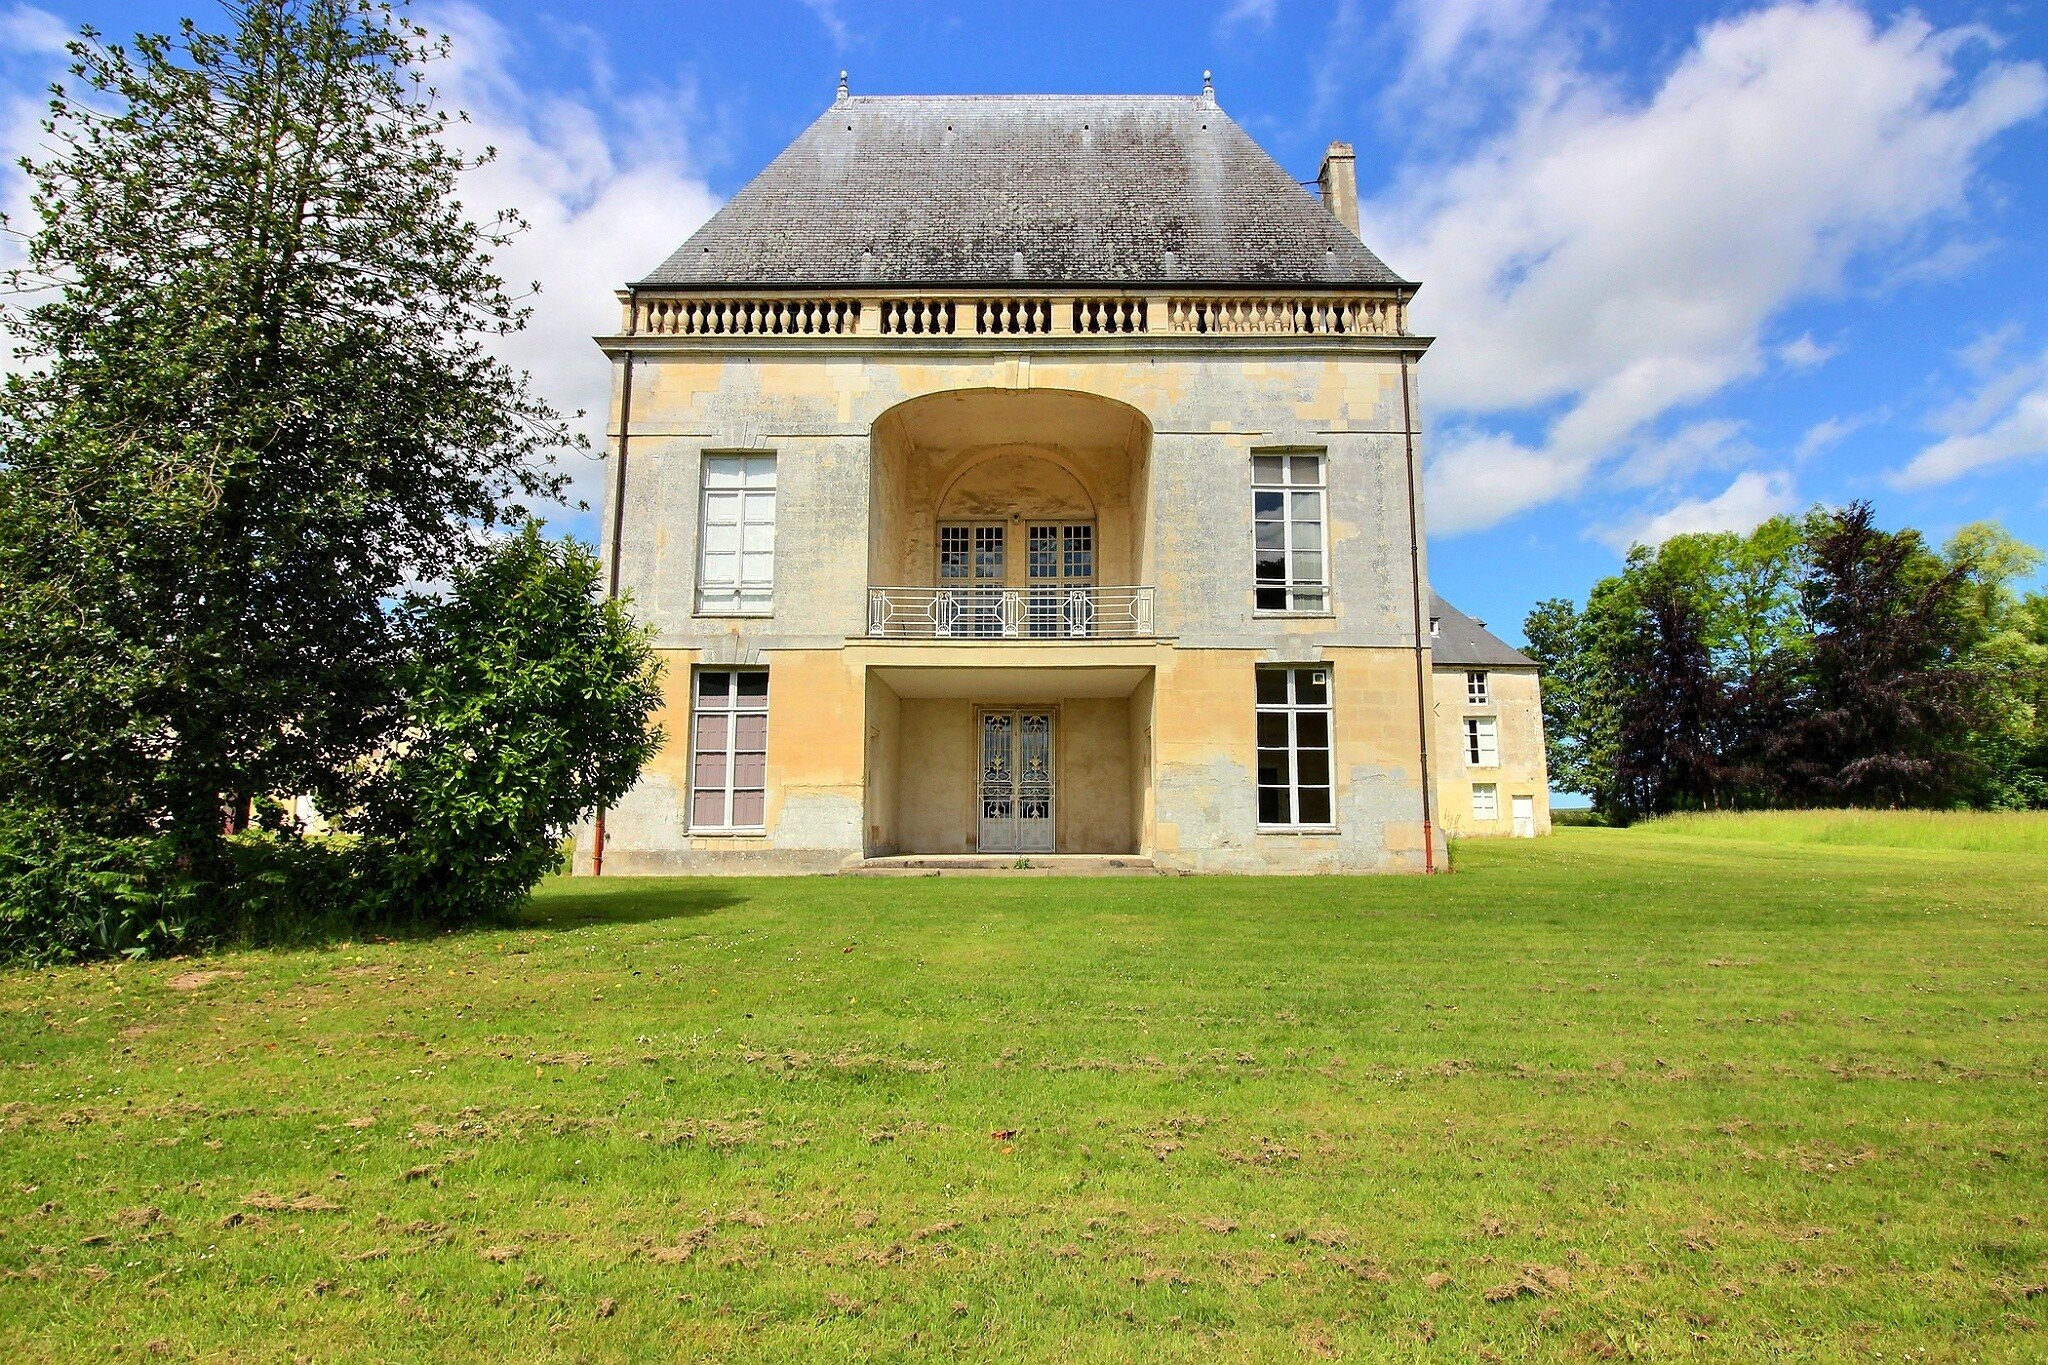 Francis York Renaissance Chateau in Normandy, France Listed for €1.5M  9.jpg